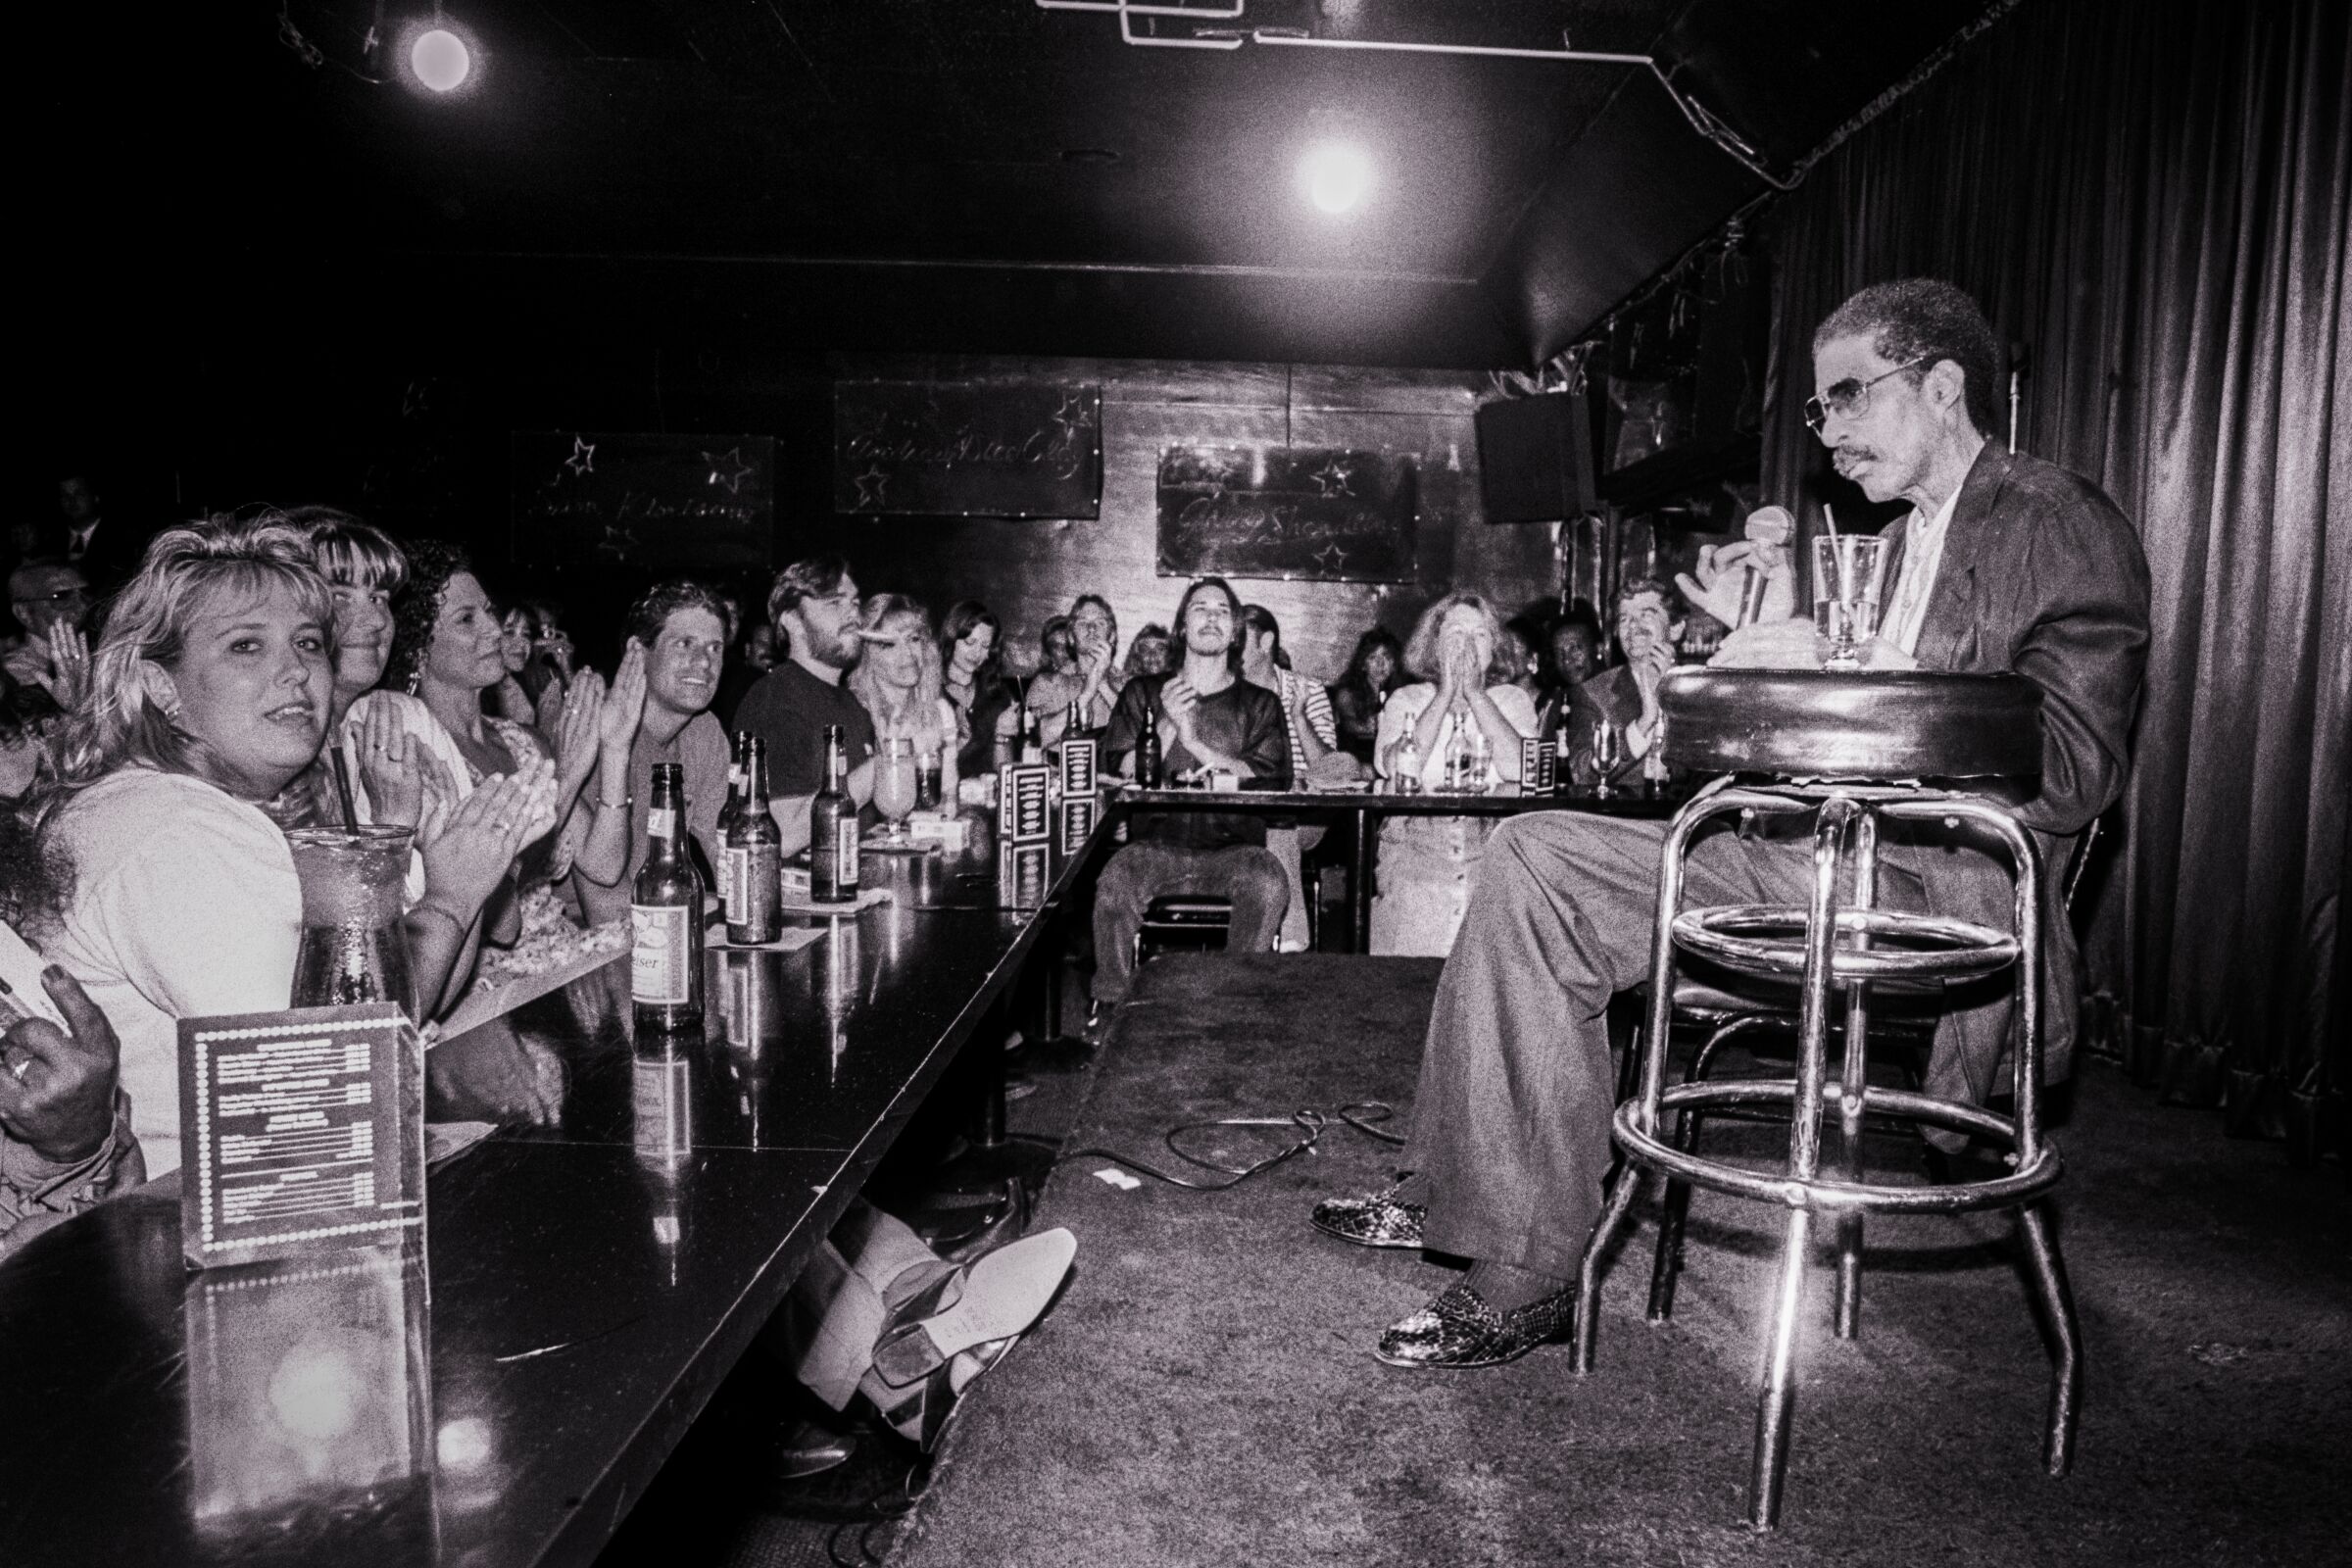 Richard Pryor performing at the Comedy Store club